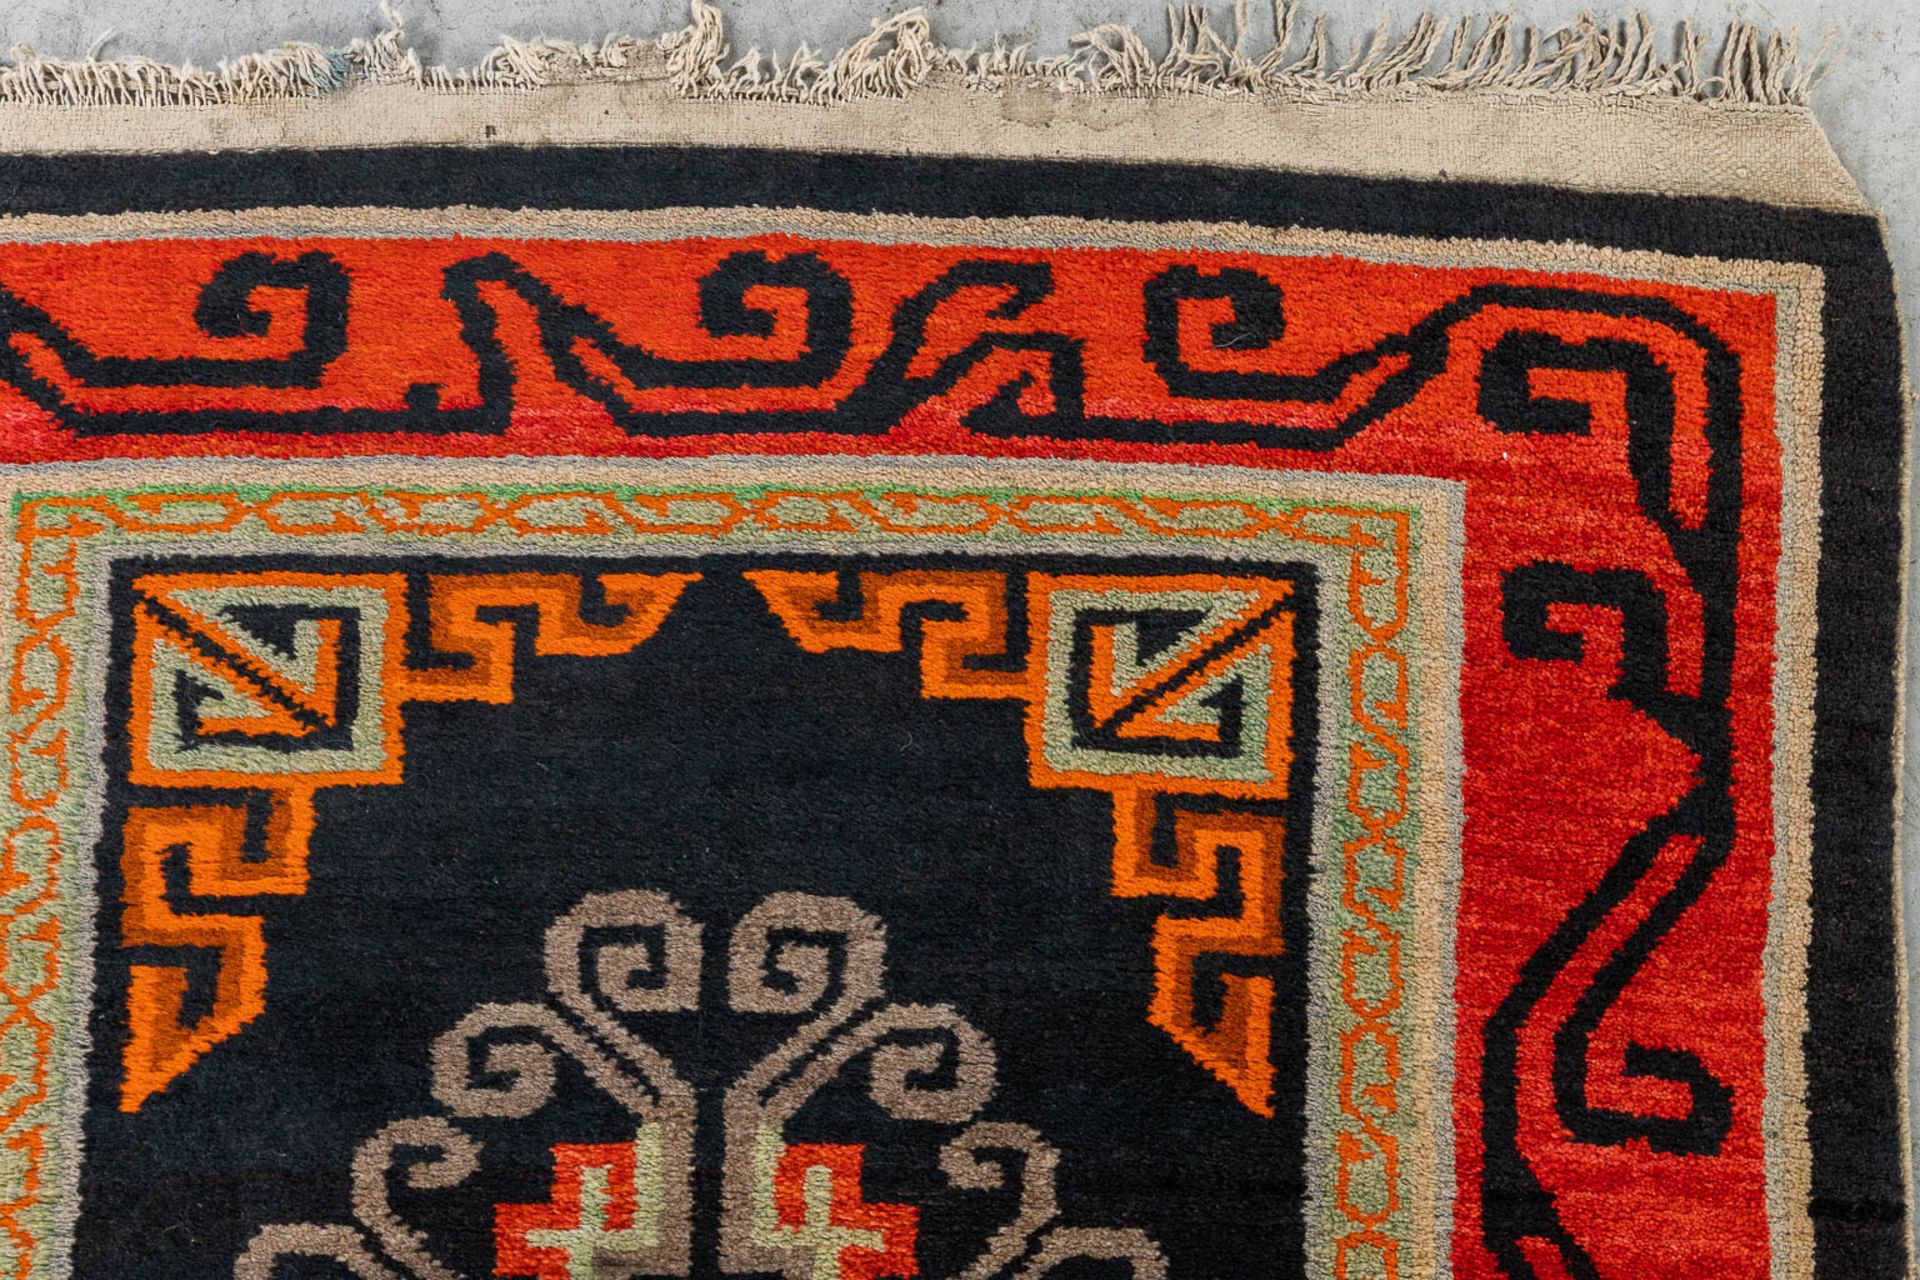 A set of 2 hand-made Oriental carpets, Gothan. (L: 160 x W: 90 cm) - Image 9 of 10